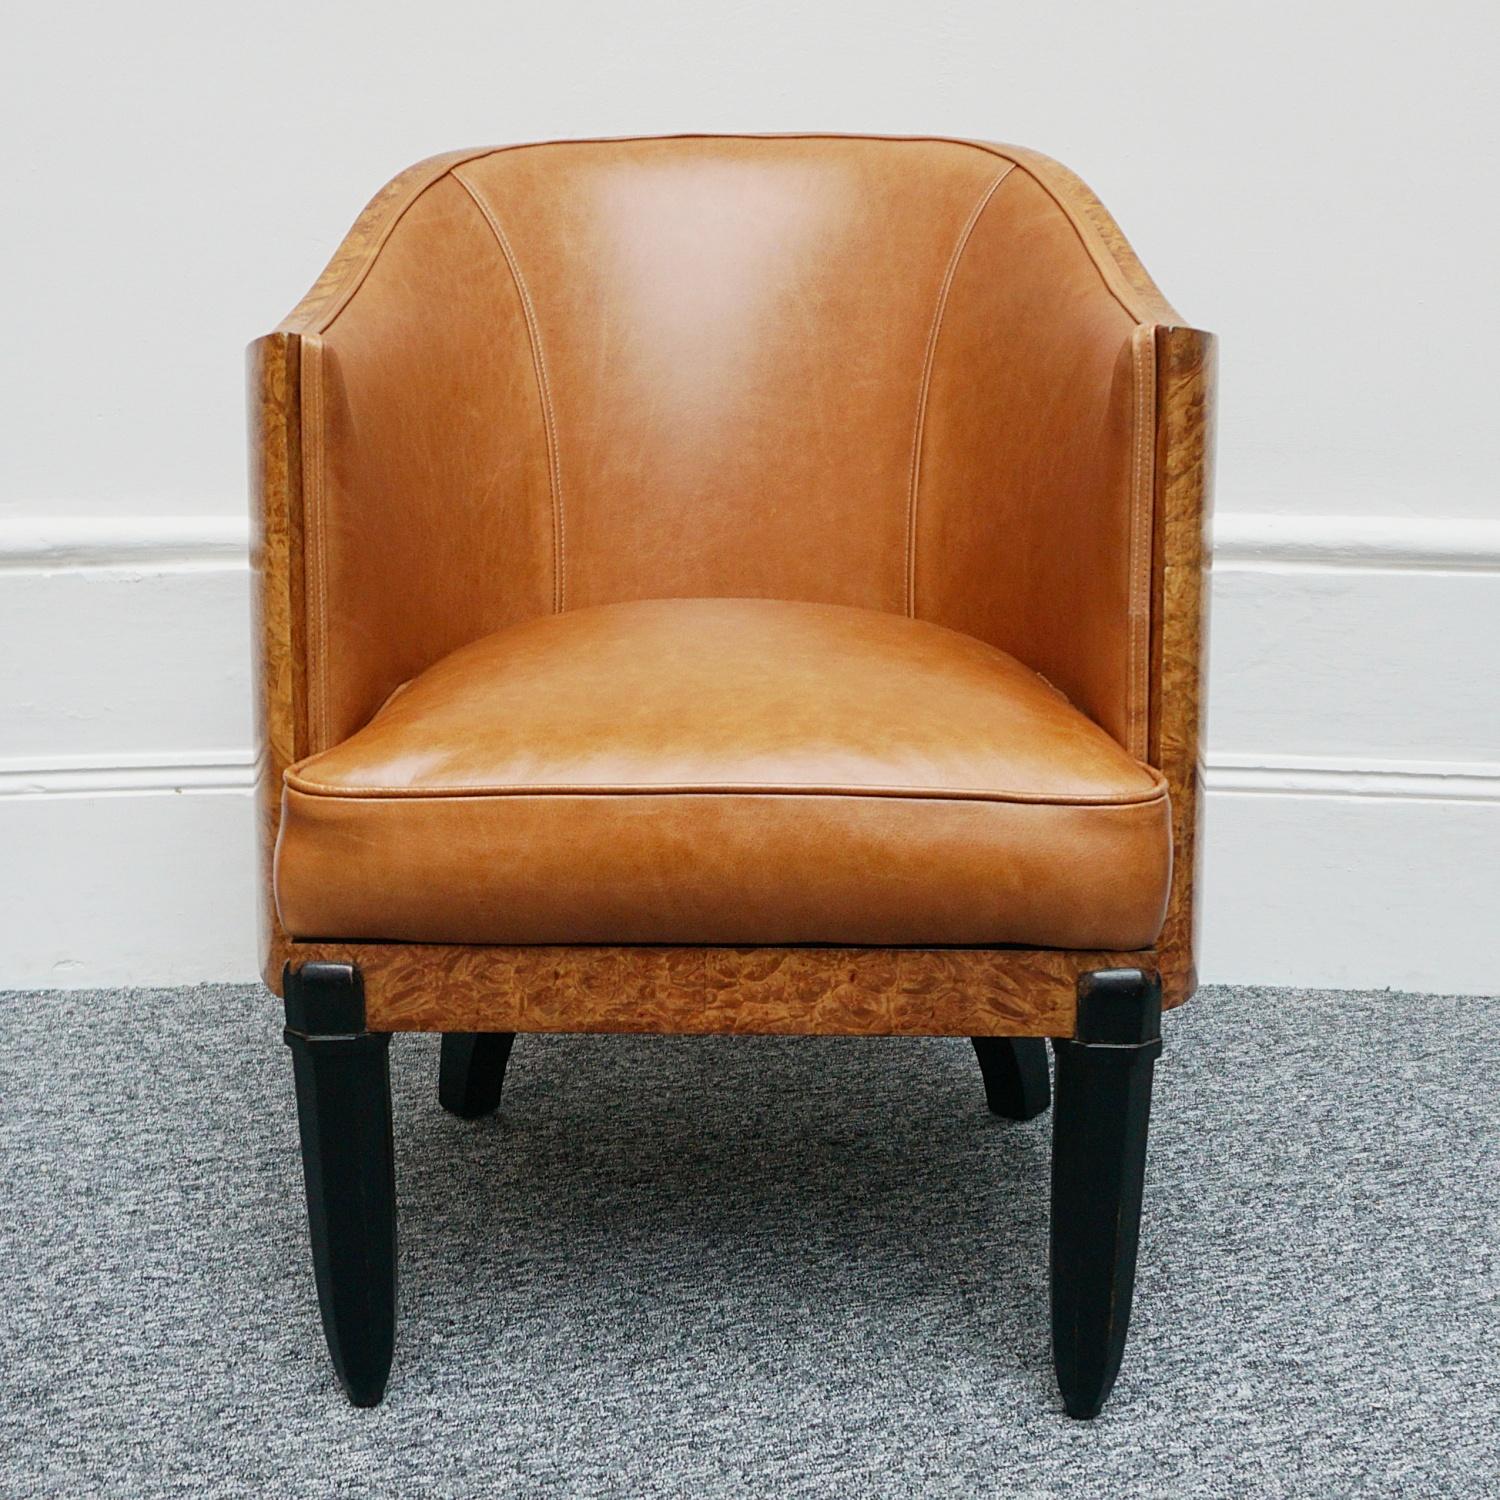 A pair of Art Deco club chairs by Maurice Adams. Burr walnut wraparound veneer with ebonized tapered legs. Re-upholstered in brown leather. 

Dimensions: H 76.5cm W 60cm D 68cm Seat H 48cm.

Origin: English

Date: circa 1935

The self